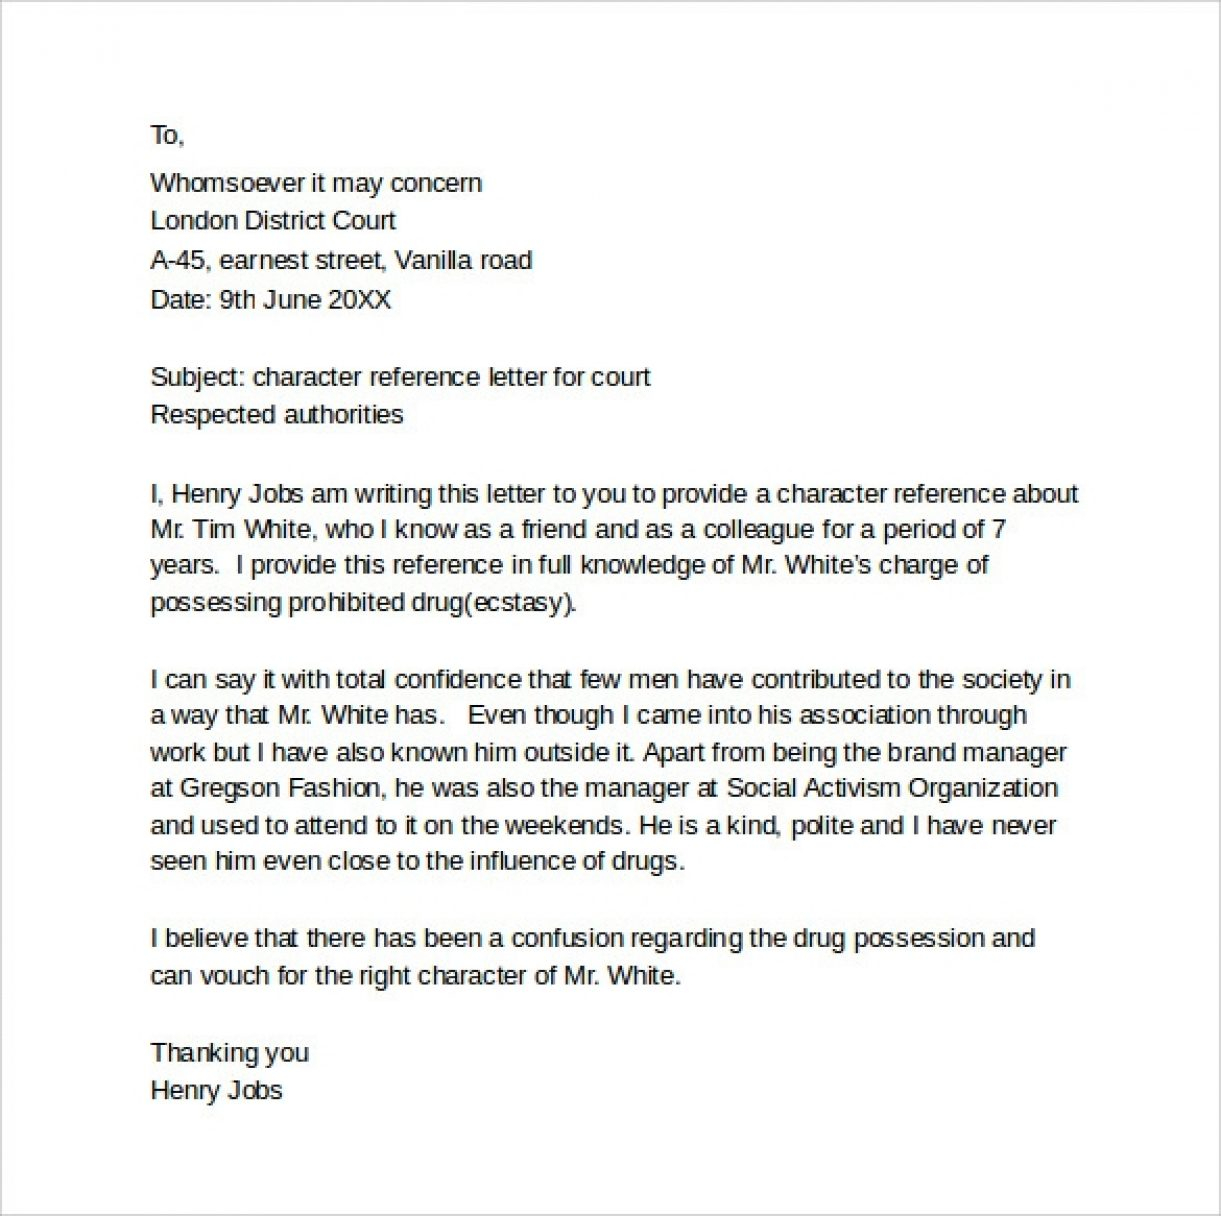 Letter Of Recommendation For Court Invazi inside dimensions 1221 X 1216